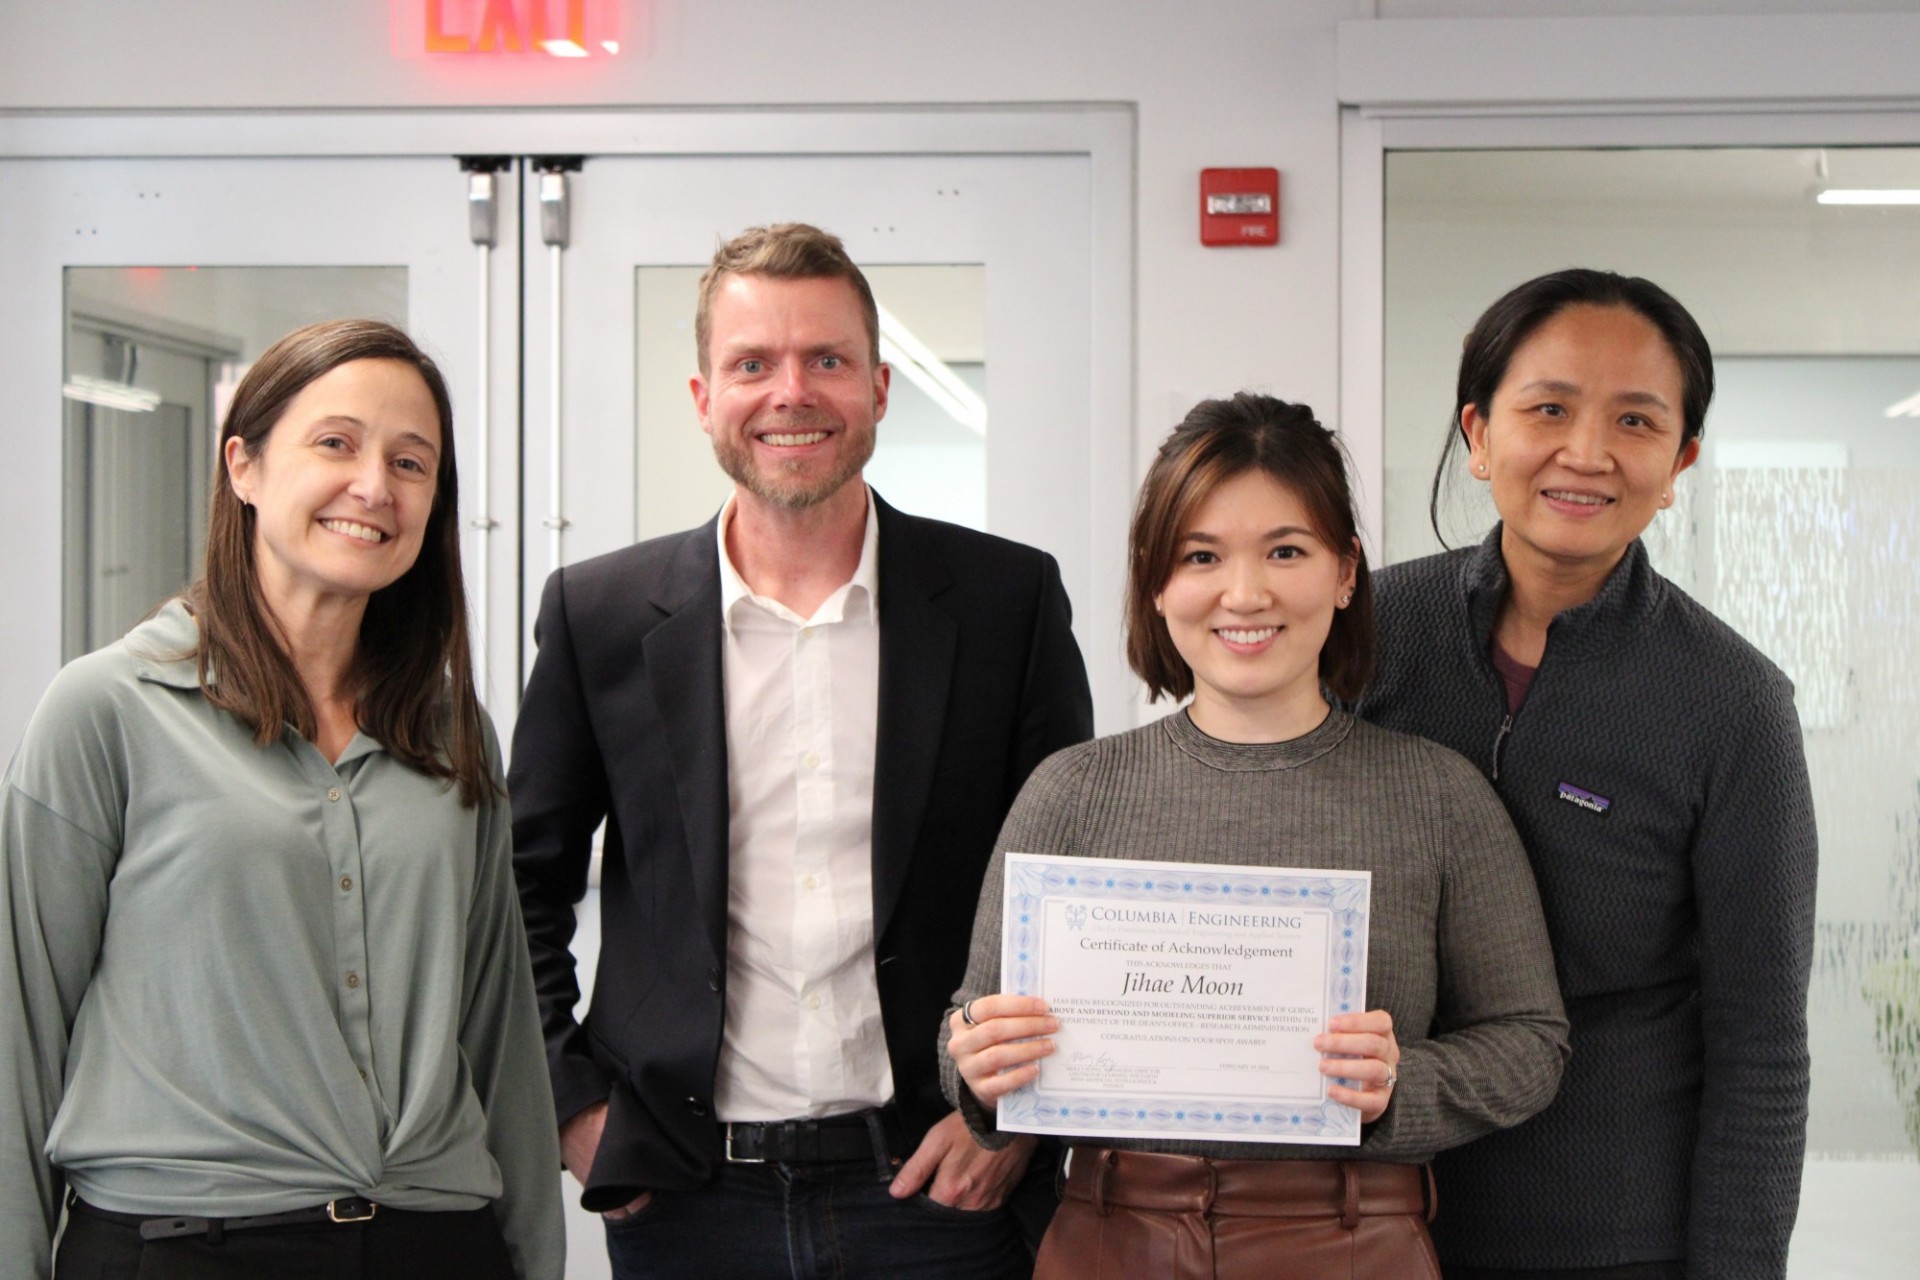 Jihae Moon holding her certificate of Acknowledgement from Columbia Engineering alongside LEAP staff.